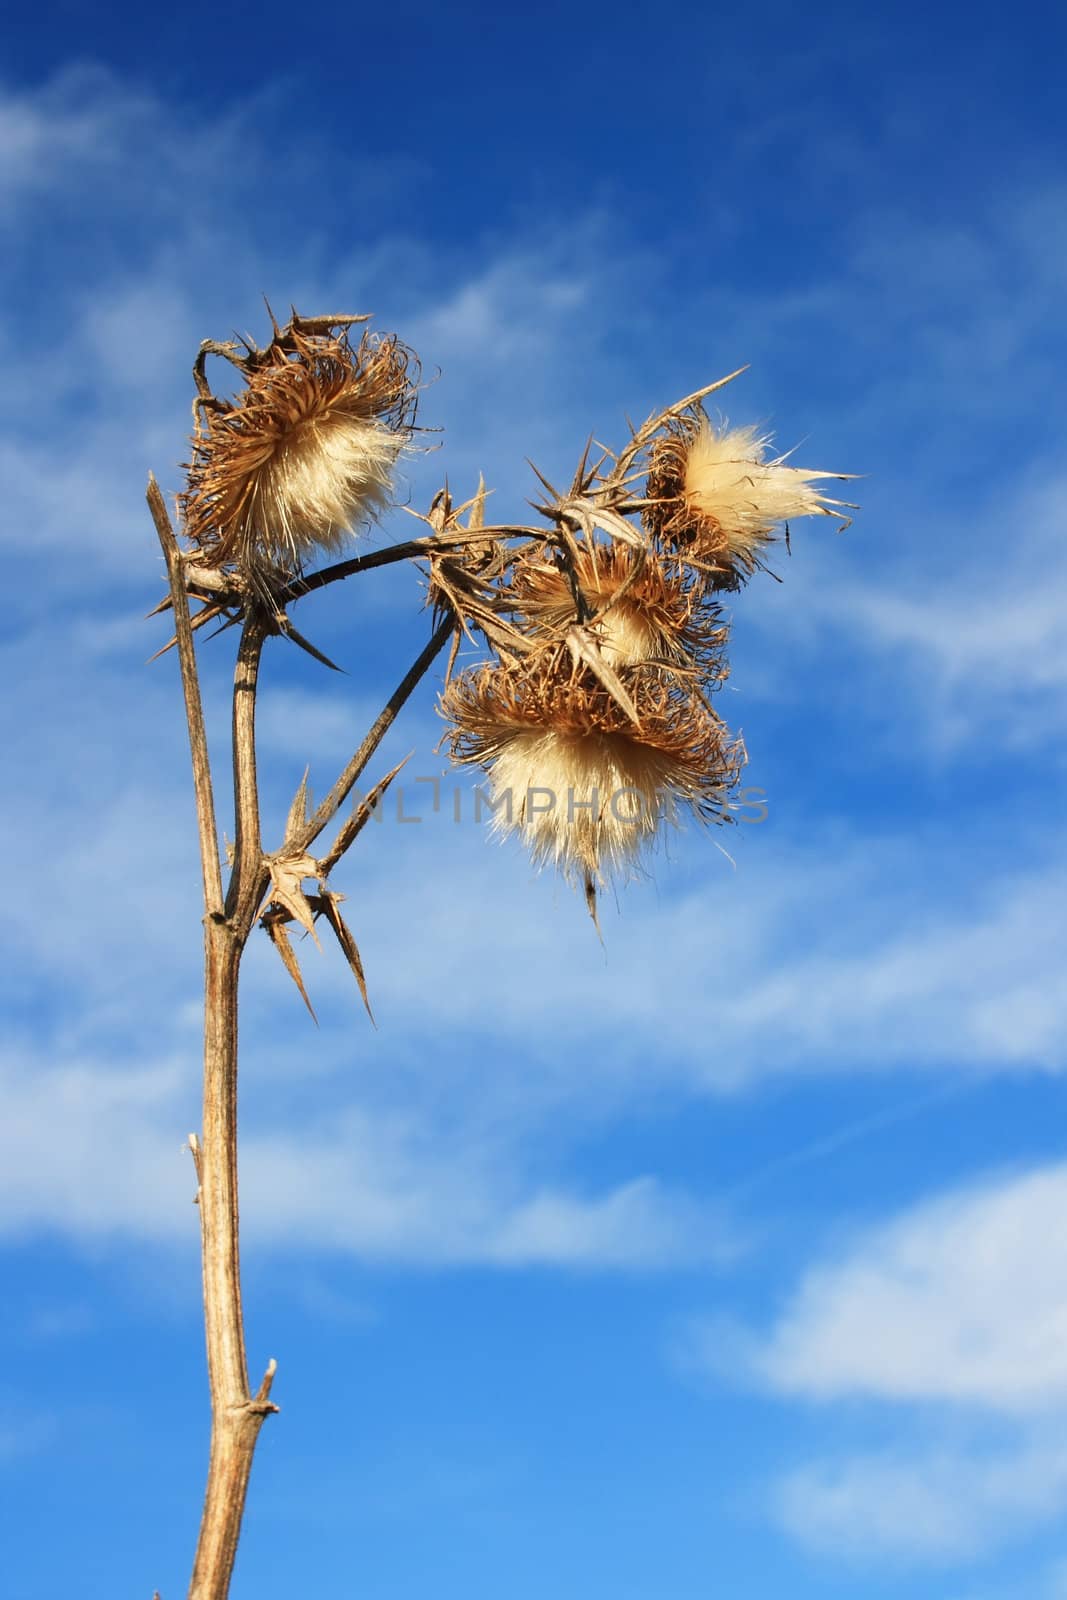 This image shows a macro from a thistle bloom with sky and clouds